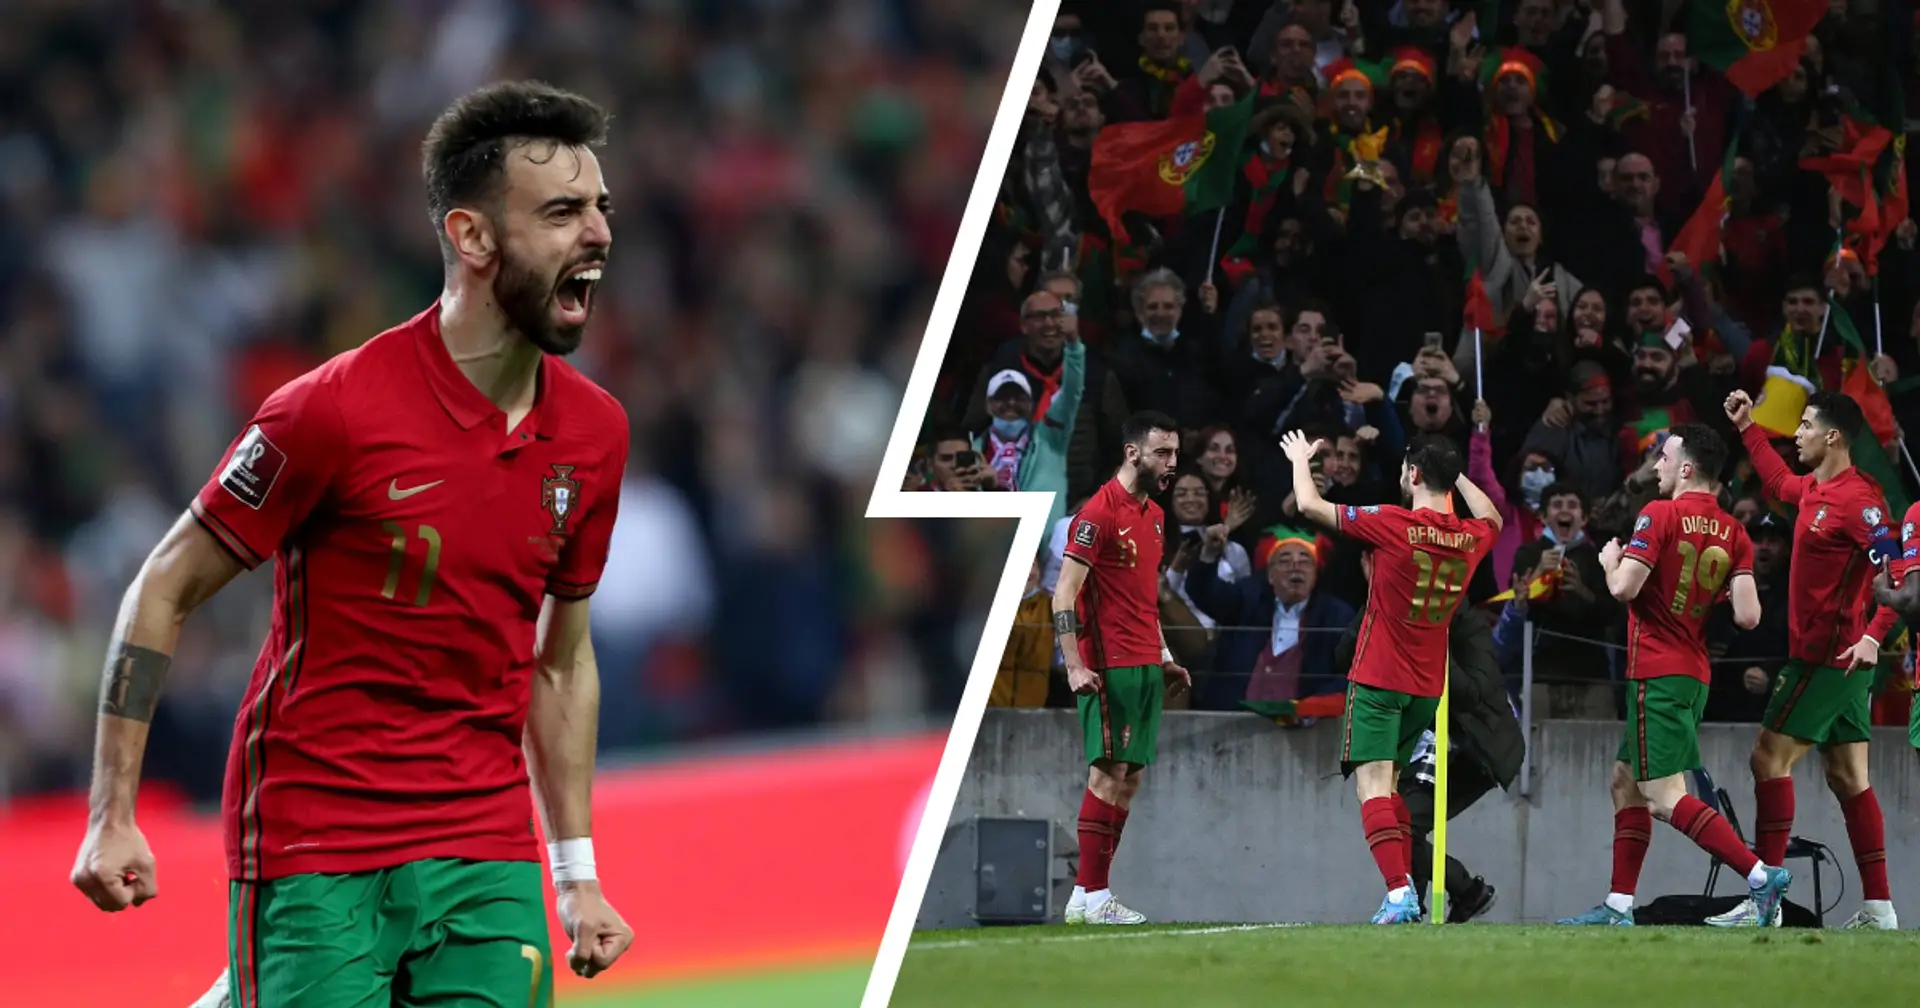 Portugal qualify for 2022 World Cup thanks to Bruno Fernandes' brace